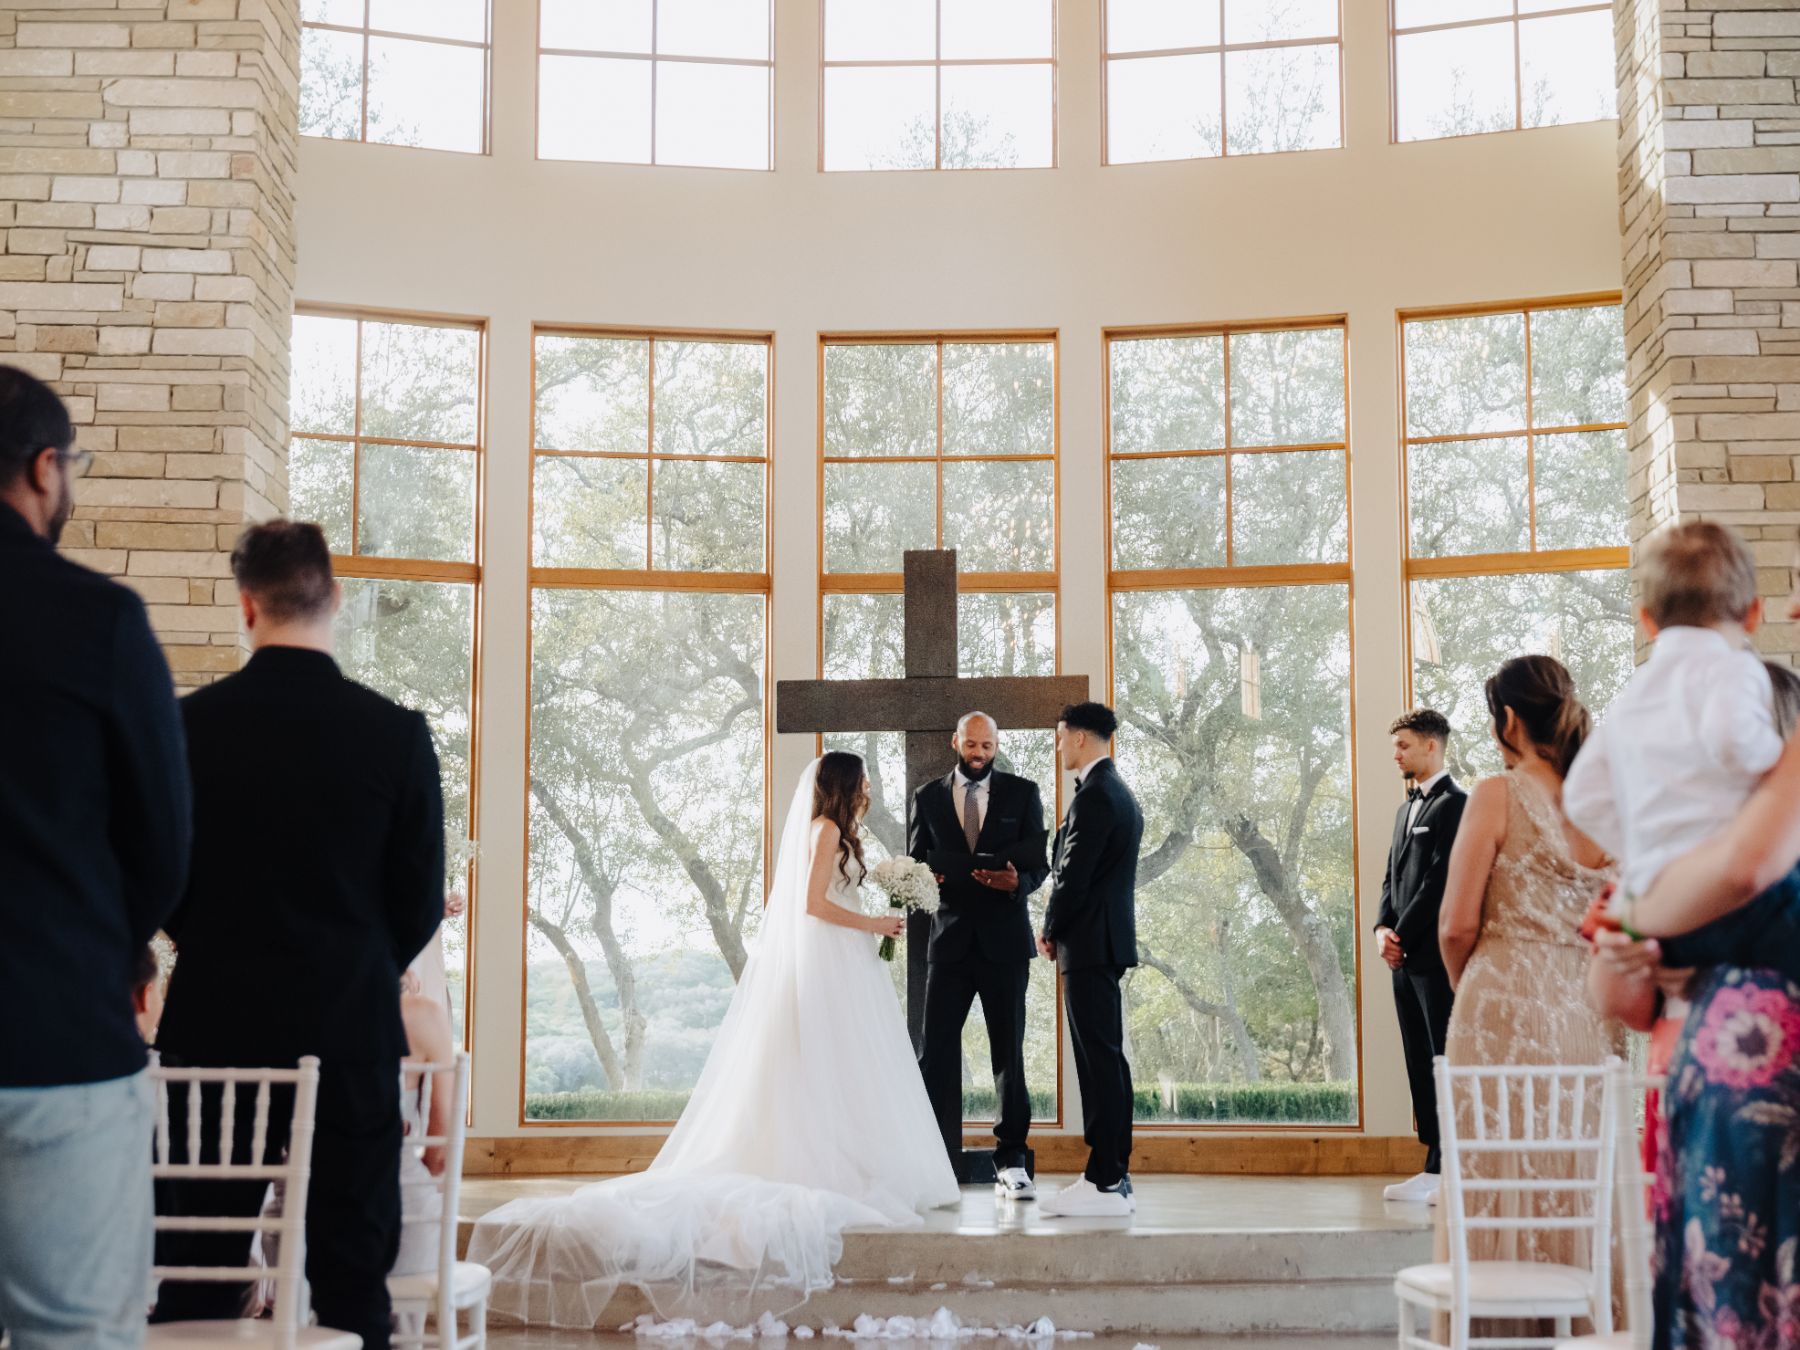 Bride and groom stand at wedding altar with a cross in the background. Texas oak trees can be seen through the large windows behind the couple at Canyonwood Ridge Wedding venue.